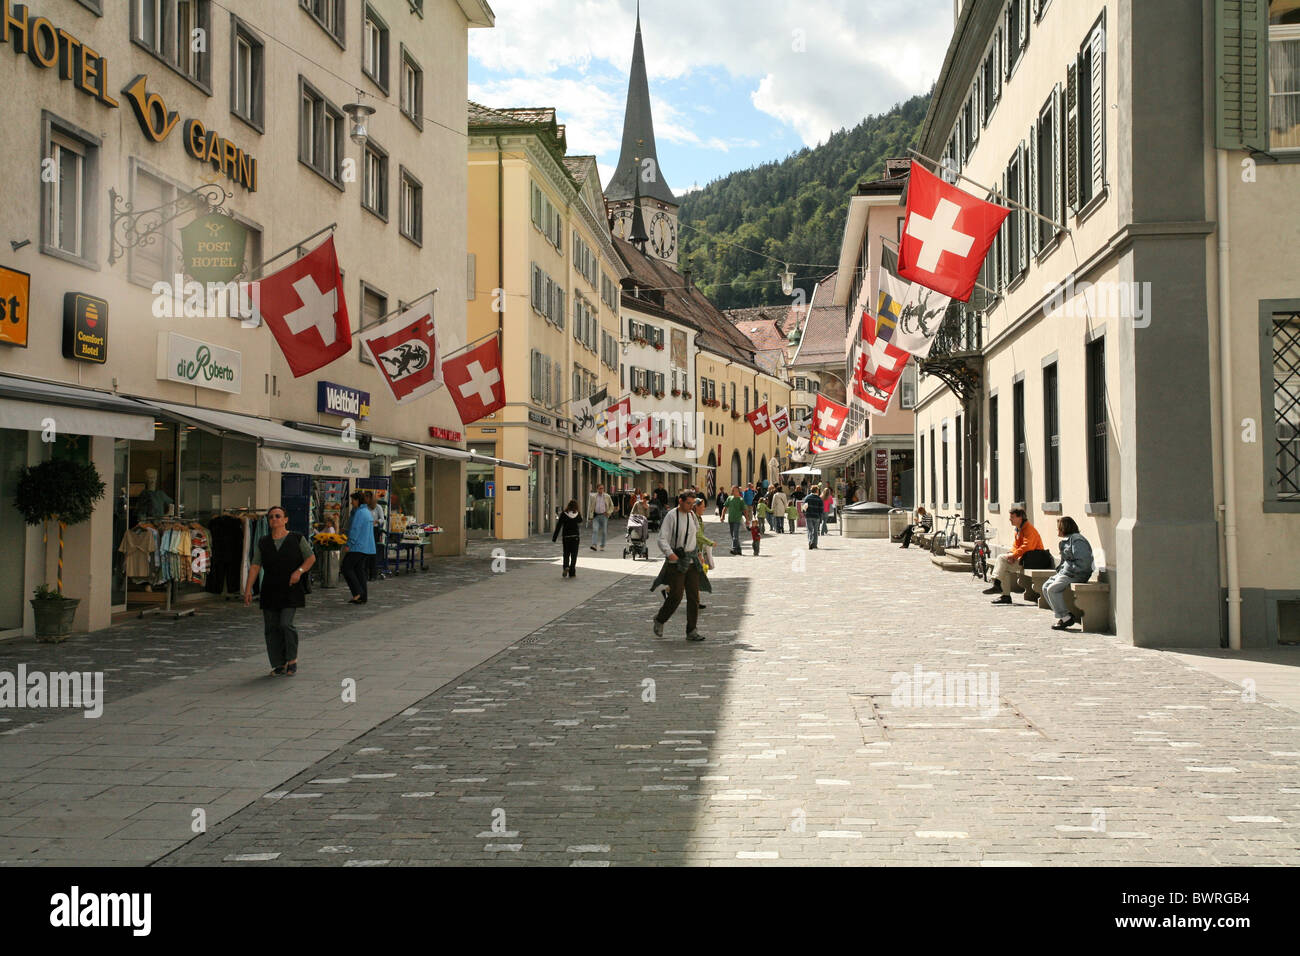 Postgasse High Resolution Stock Photography and Images - Alamy